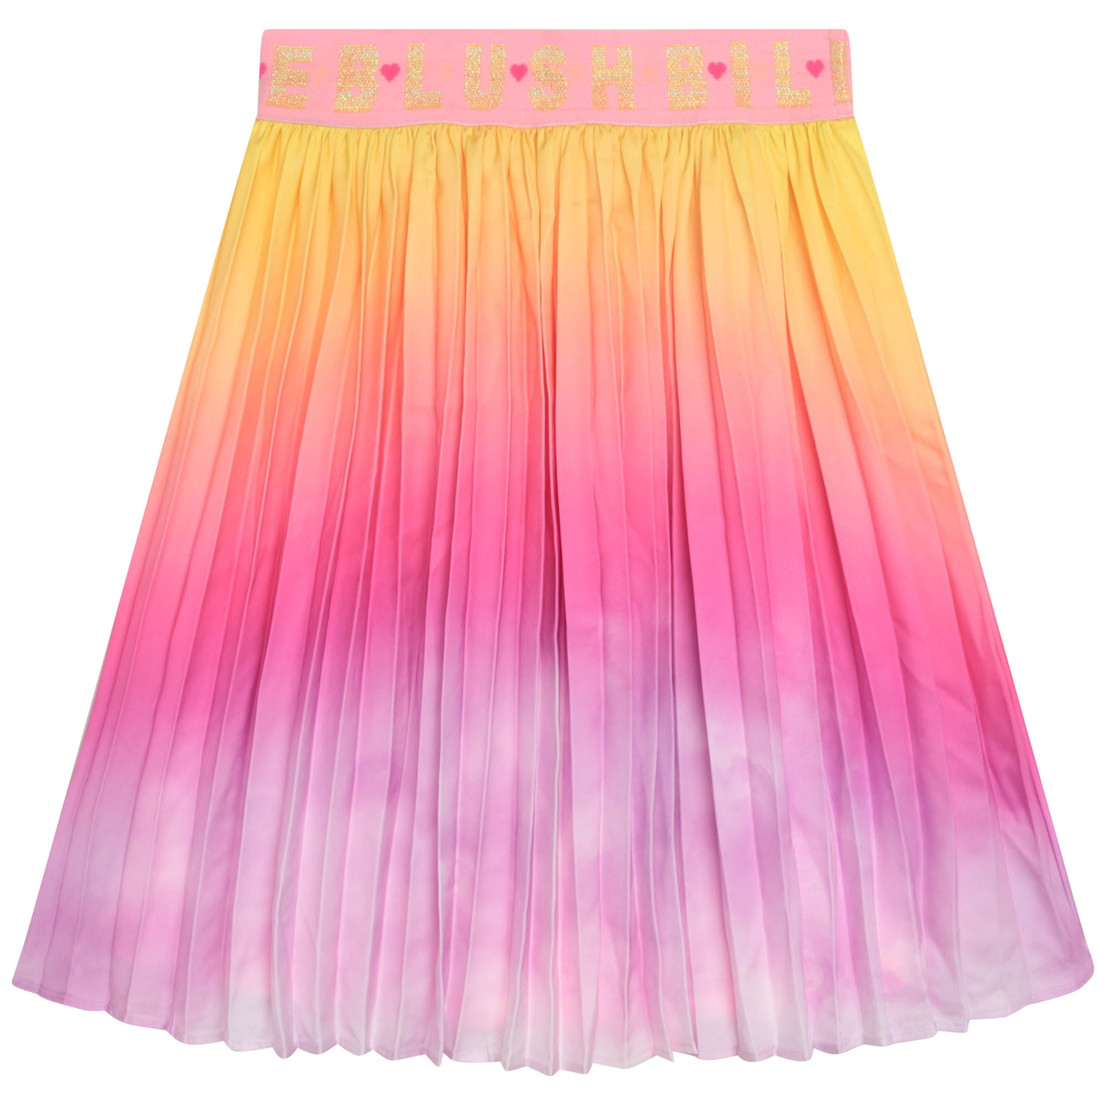 Polyester pleated skirt, gradient allover, lining,